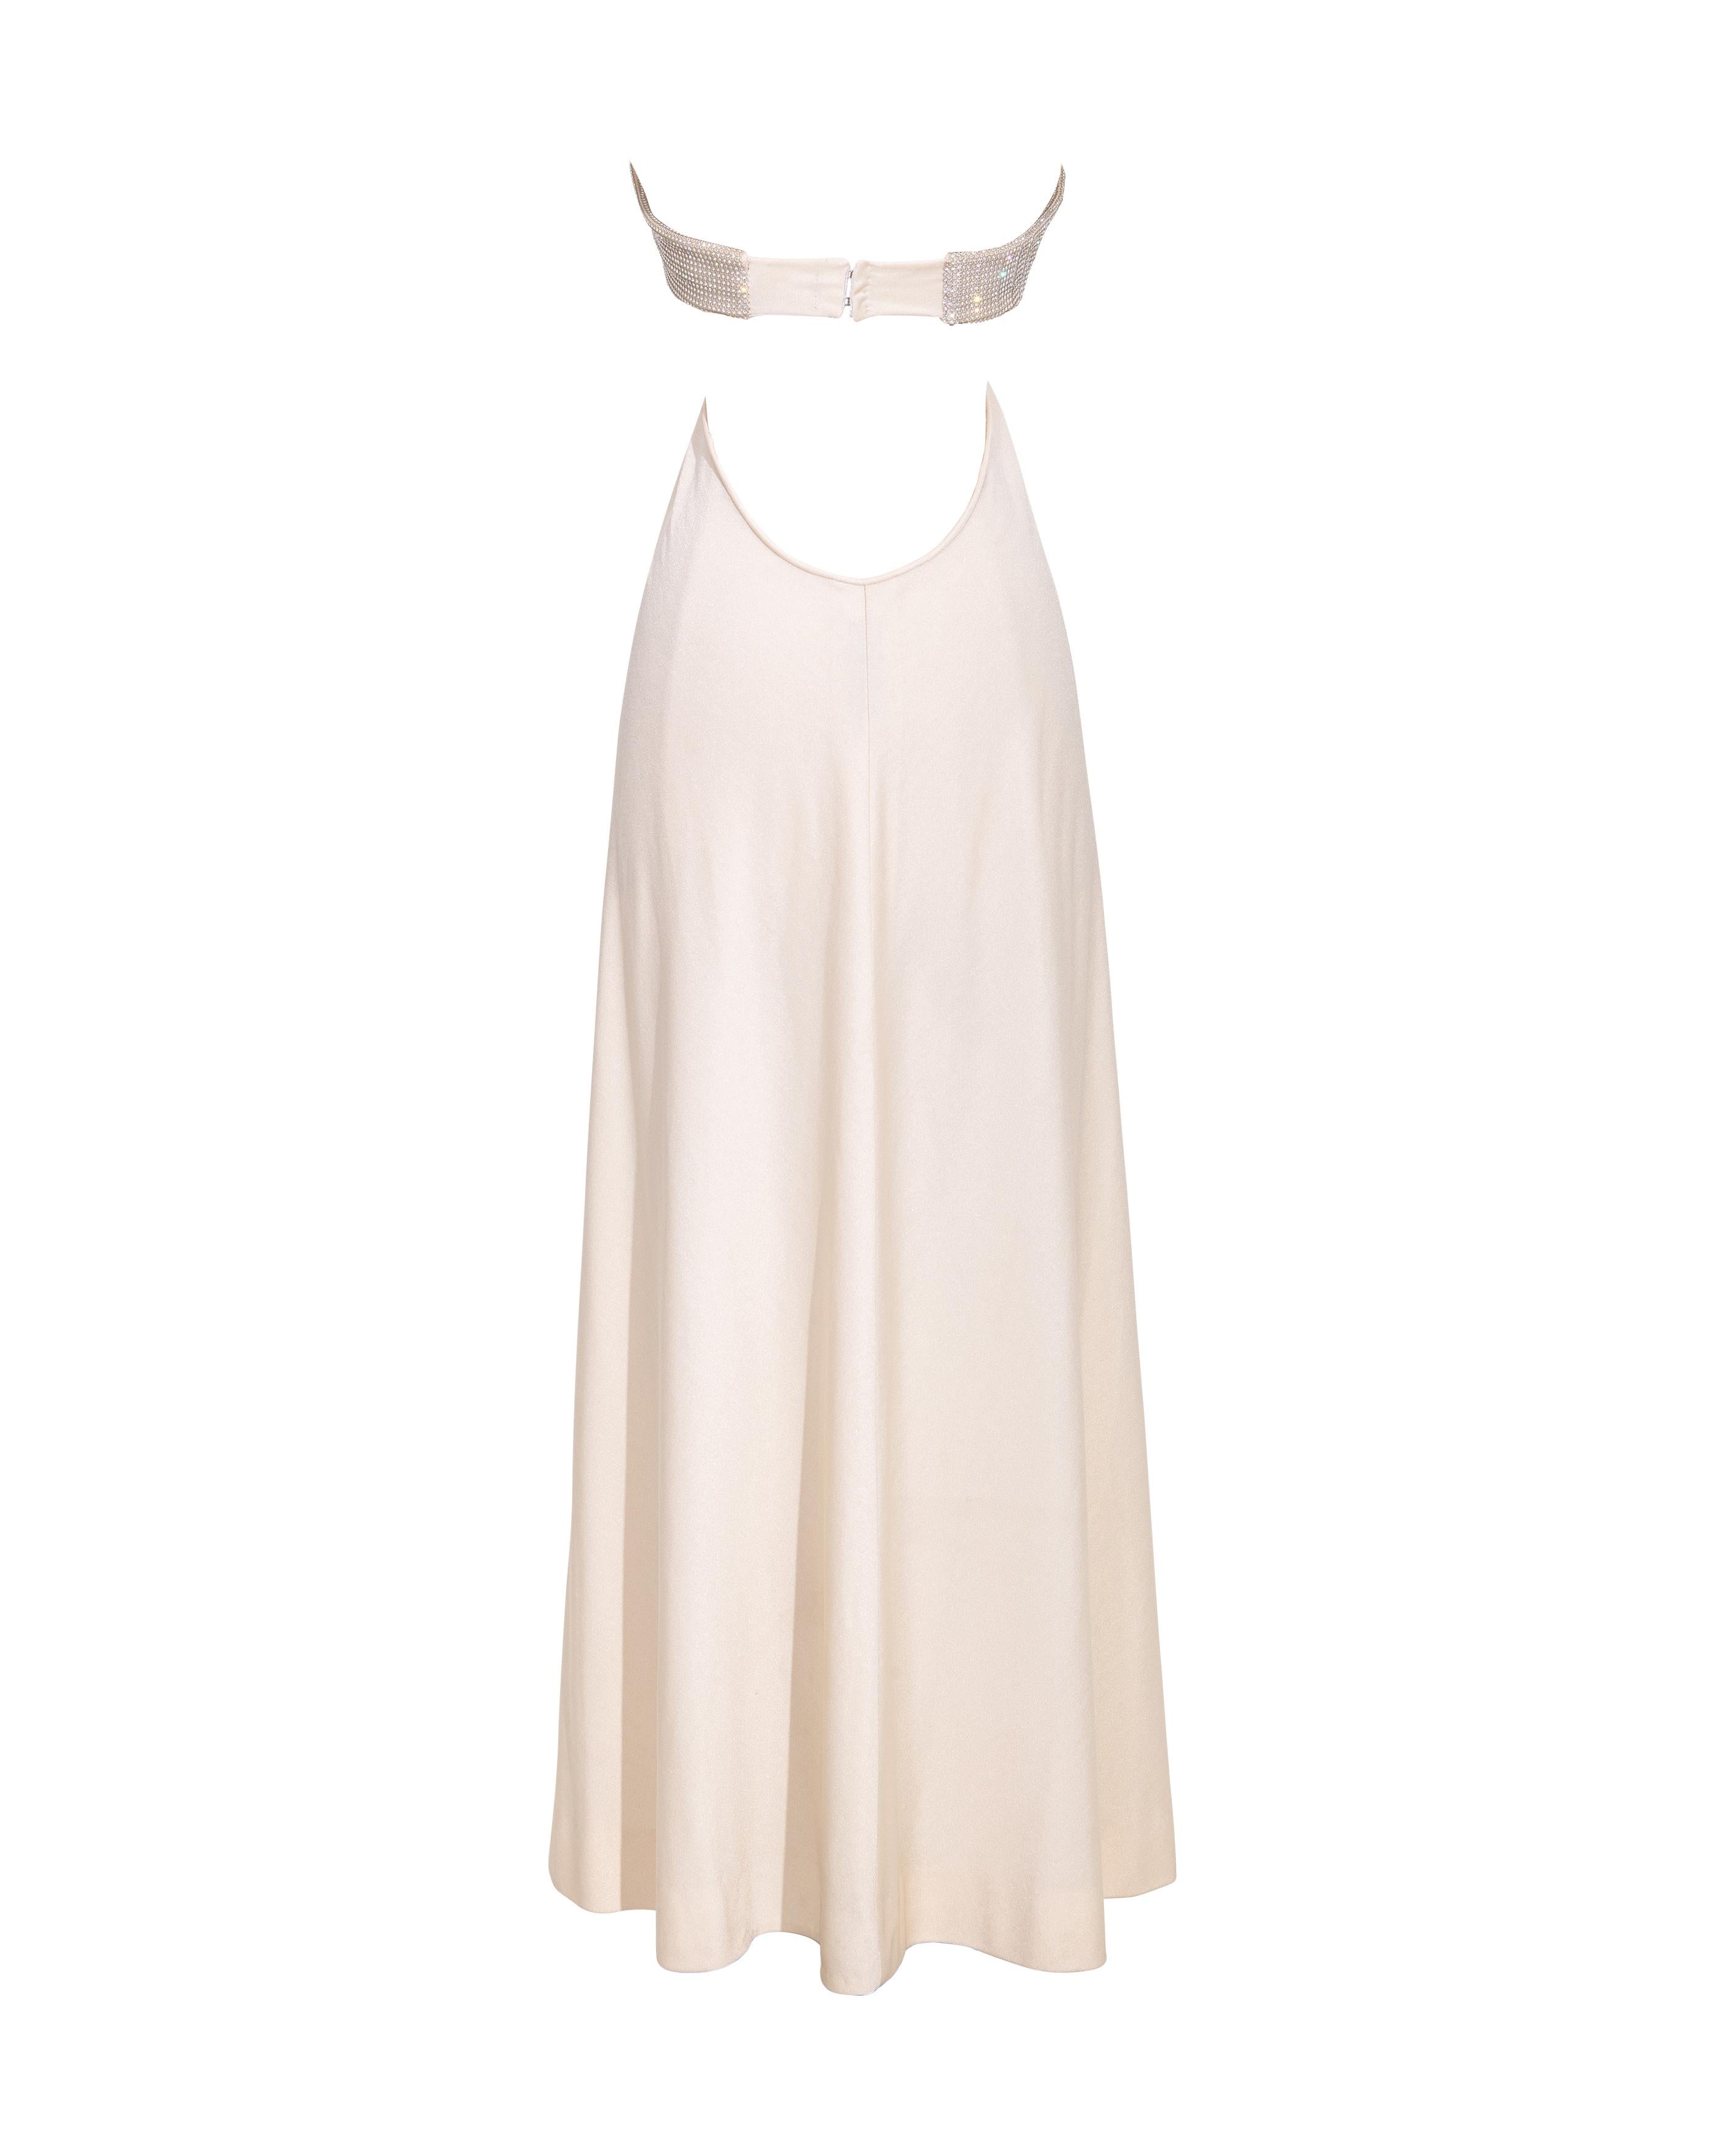 1978 Loris Azzaro White Gown with Crystal Cutout Bodice 1